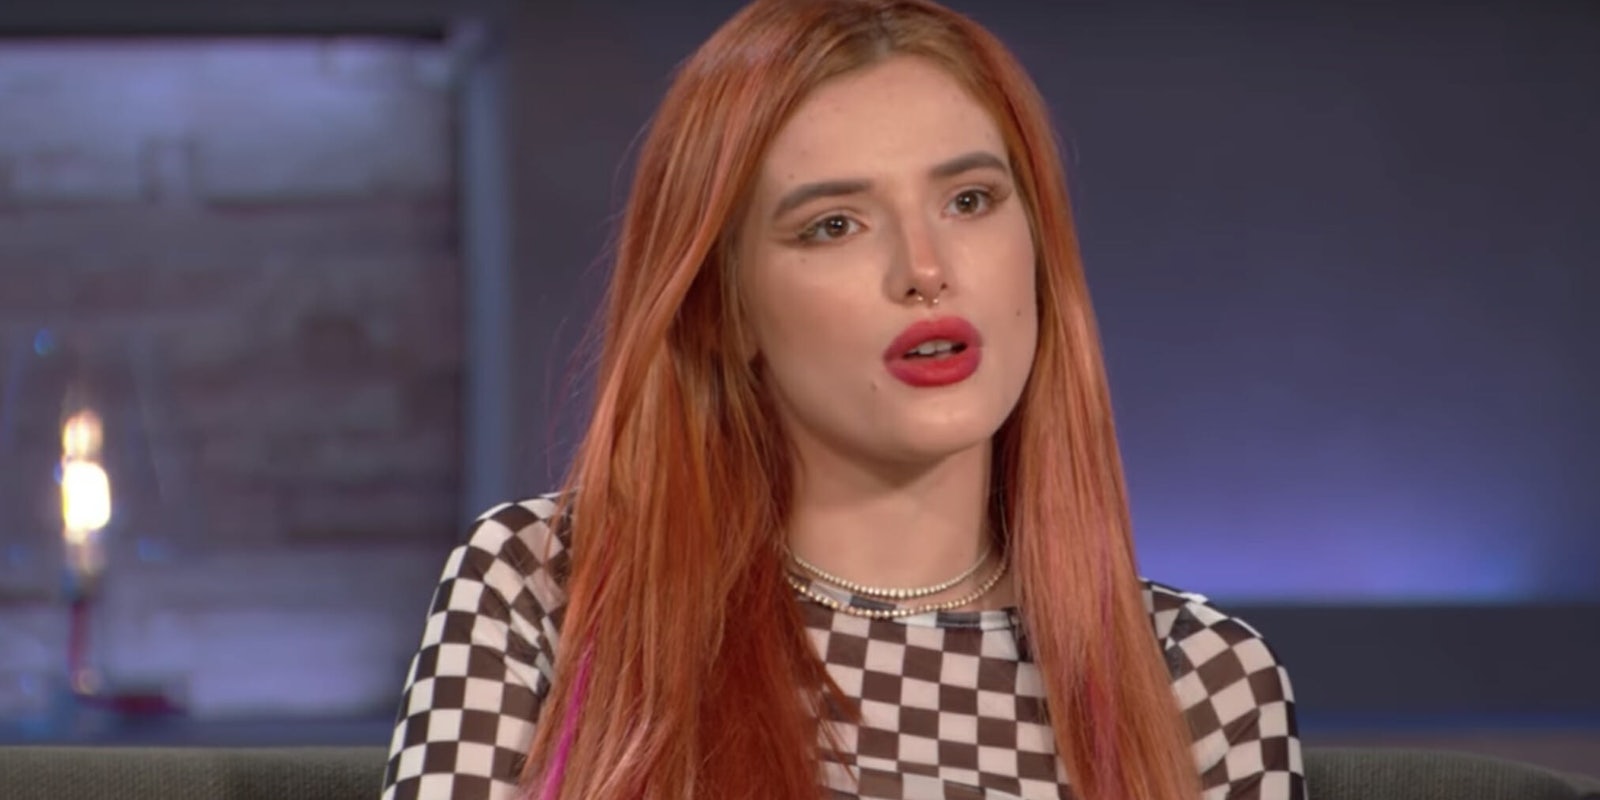 Bella Thorne said in an Instagram post that she was sexually and physically abused until she was 14.